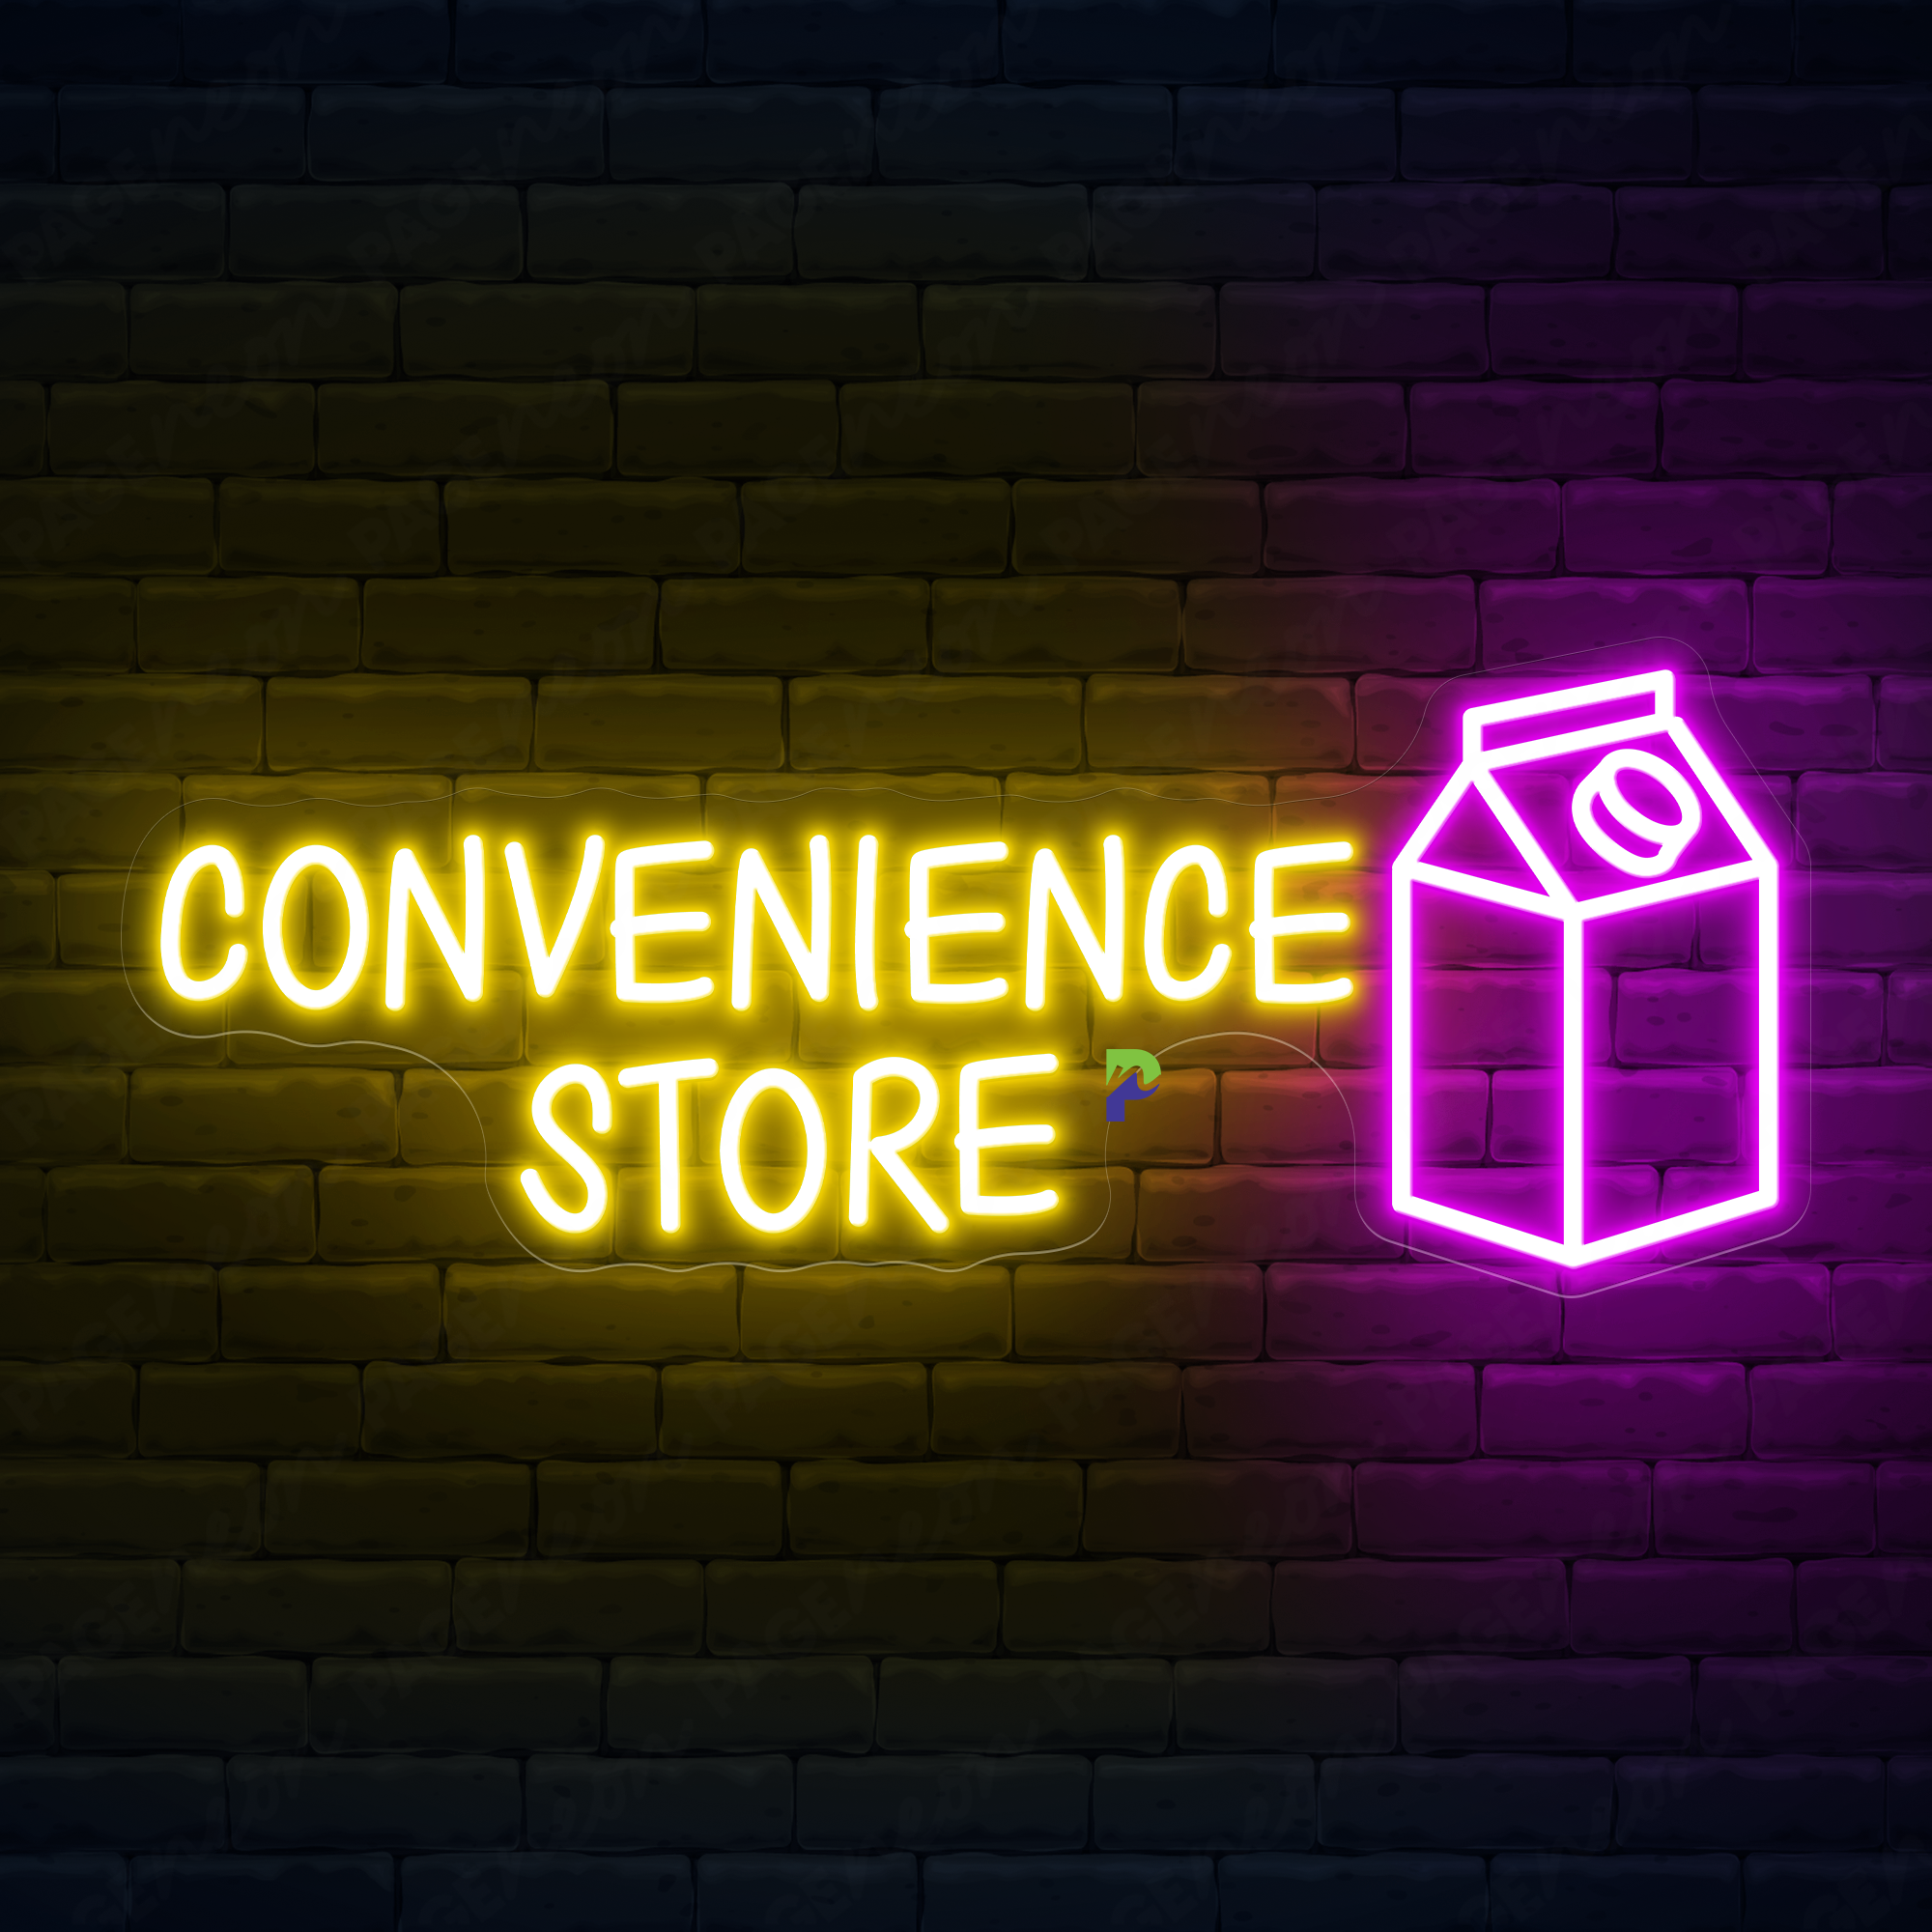 Convenience Store Neon Sign Business Big Led Light